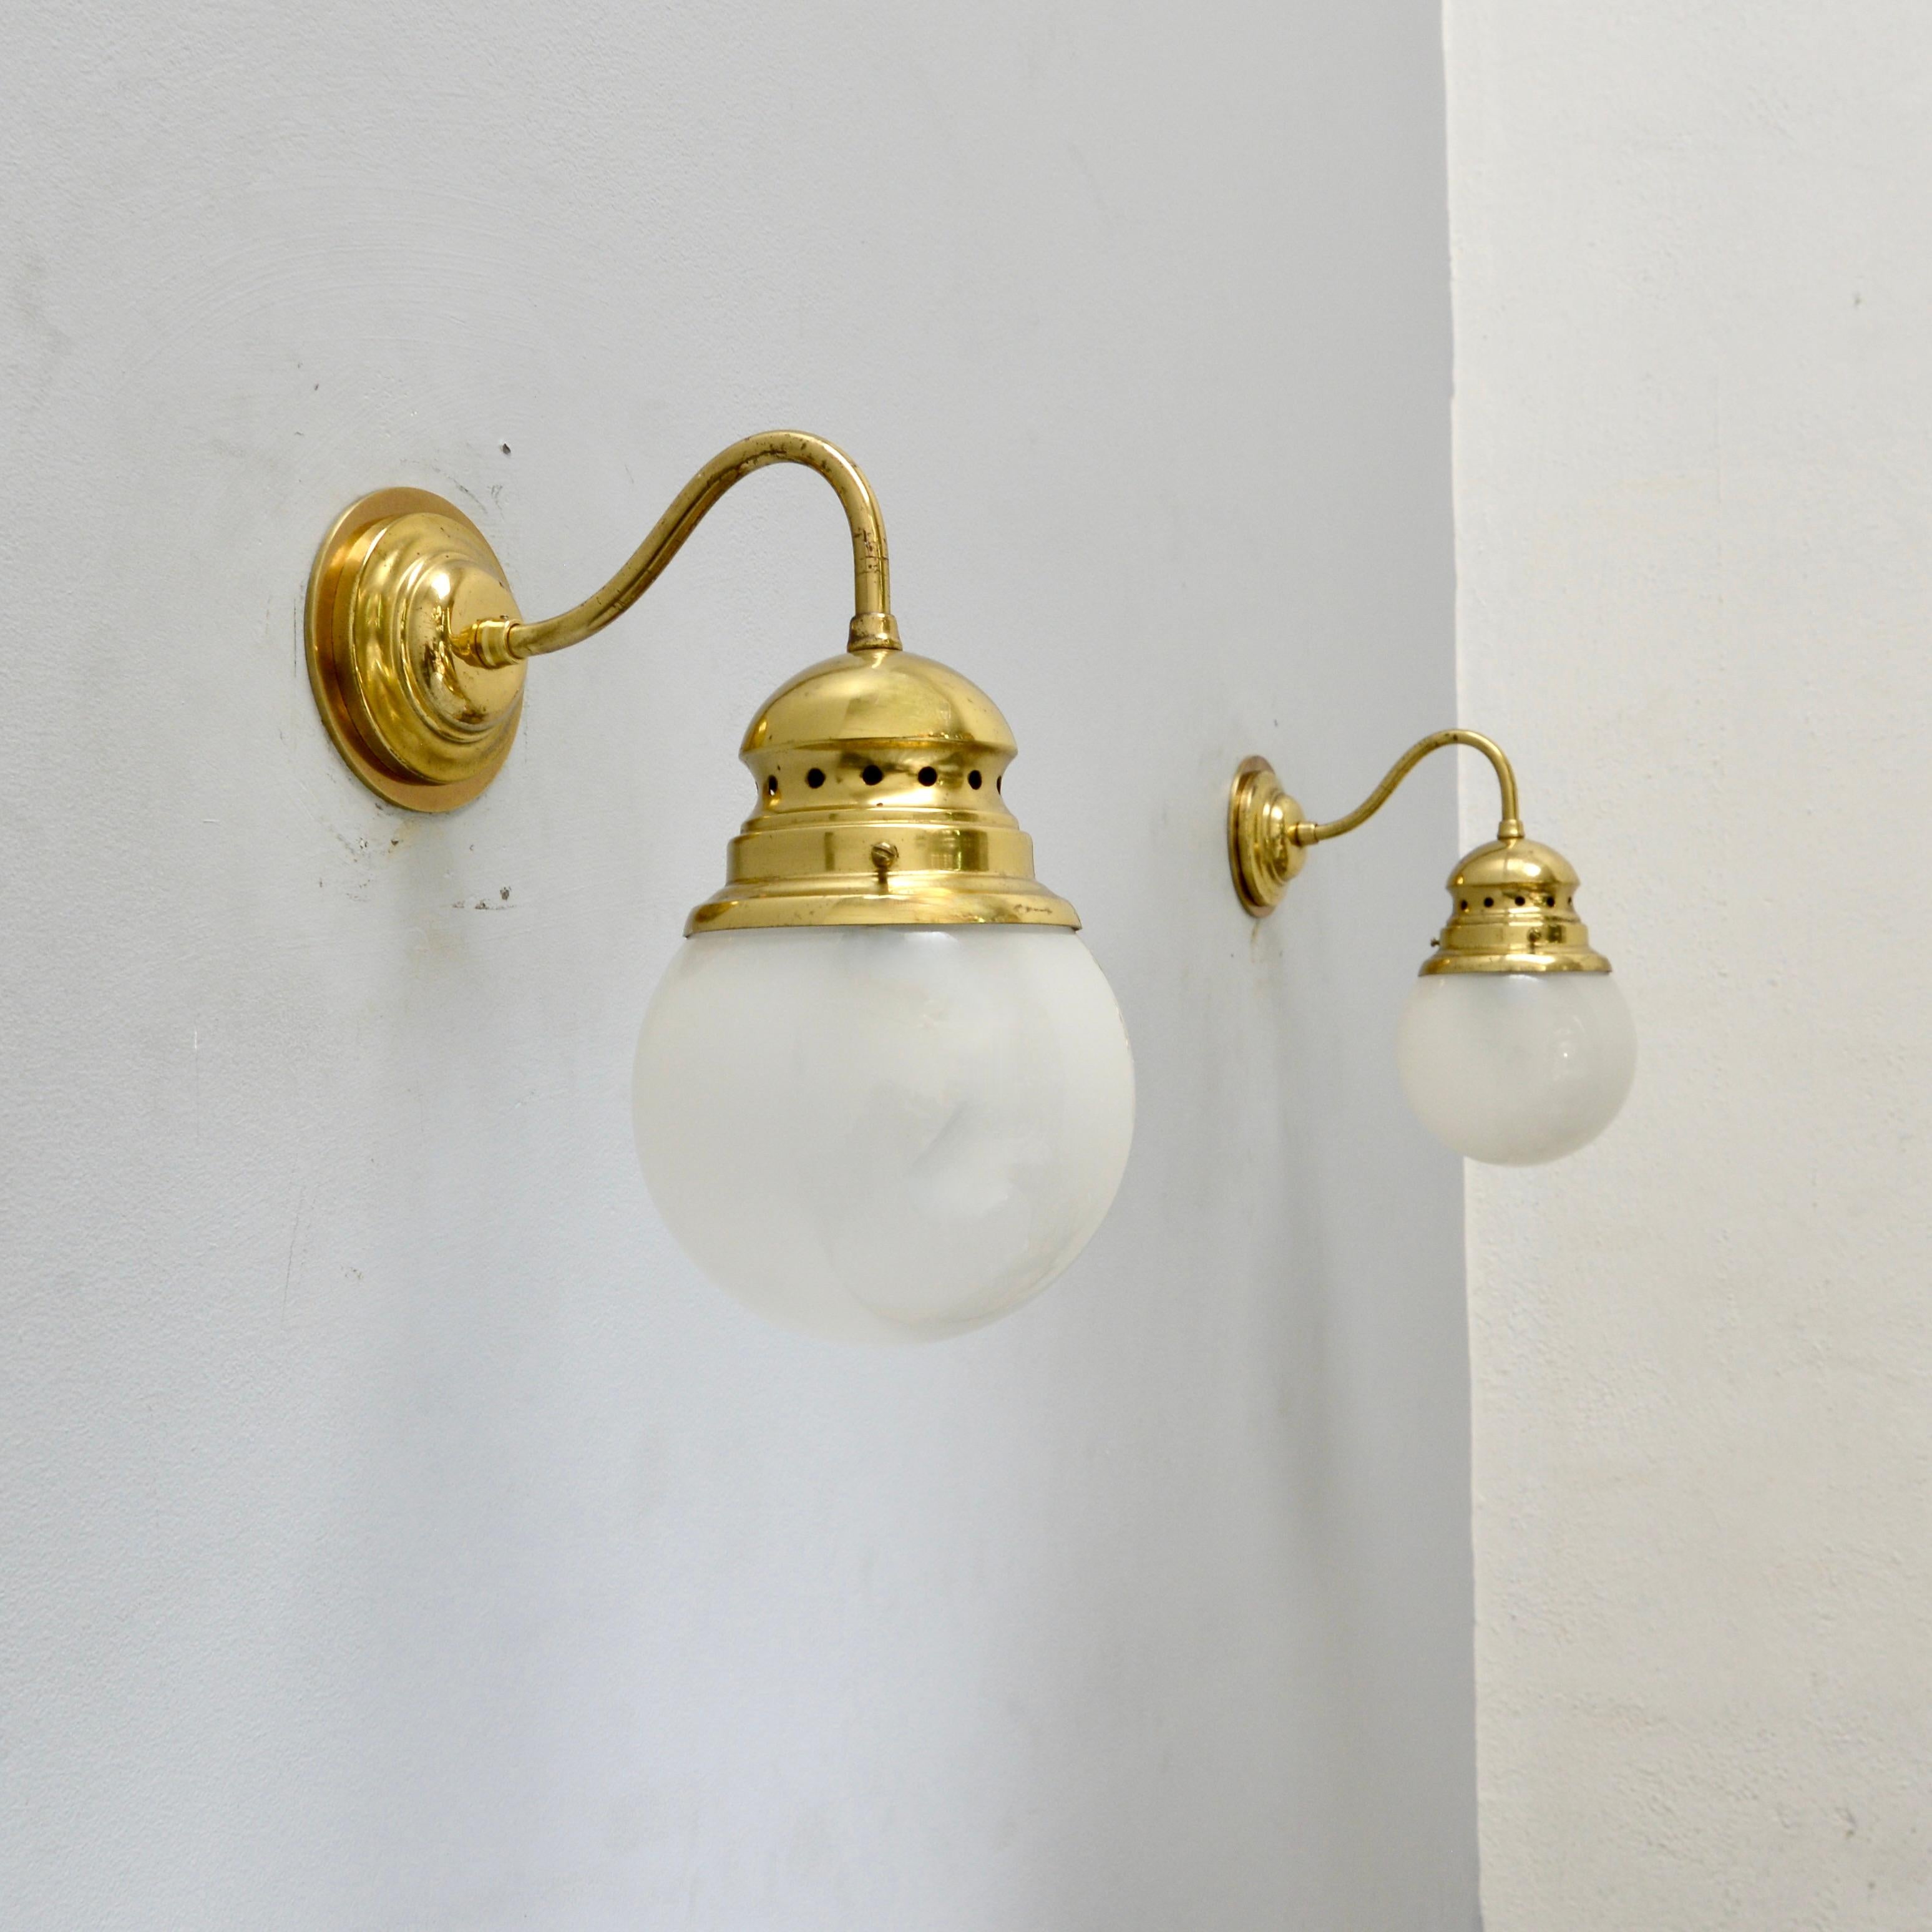 (3) Elegant Italian “Lampione” sconces from the 1950s by Luigi Caccia Dominioni. These sconces are a smaller version of the classical fixture and are in a the original aged brass finish and glass. Partially restored and rewired with (1) E26 medium